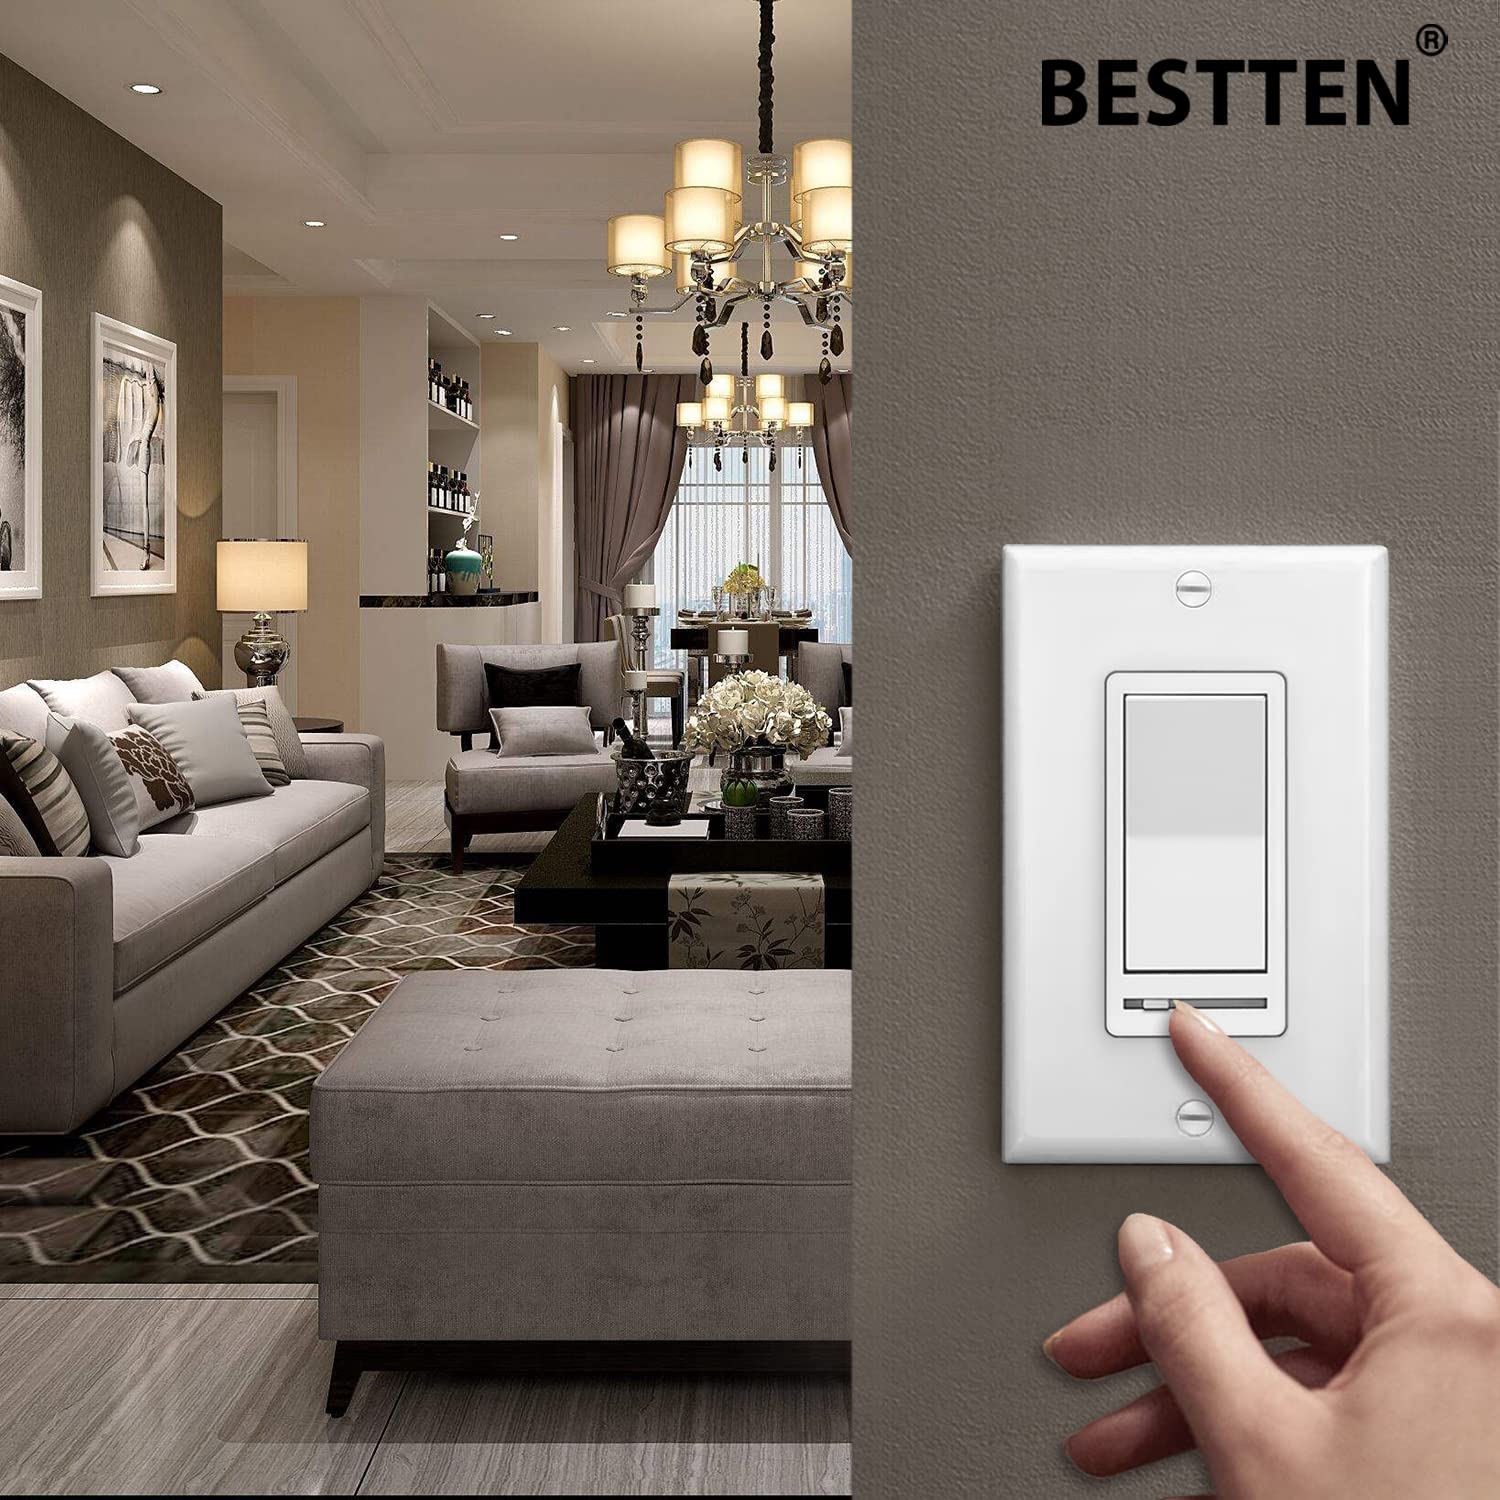 [10 Pack] BESTTEN Dimmer Light Switch, Single-Pole or 3-Way Dimmer Switches, 120V, Compatible with Dimmable LED, CFL, Incandescent and Halogen Bulbs, Decorator Wallplate Included, UL Listed, White